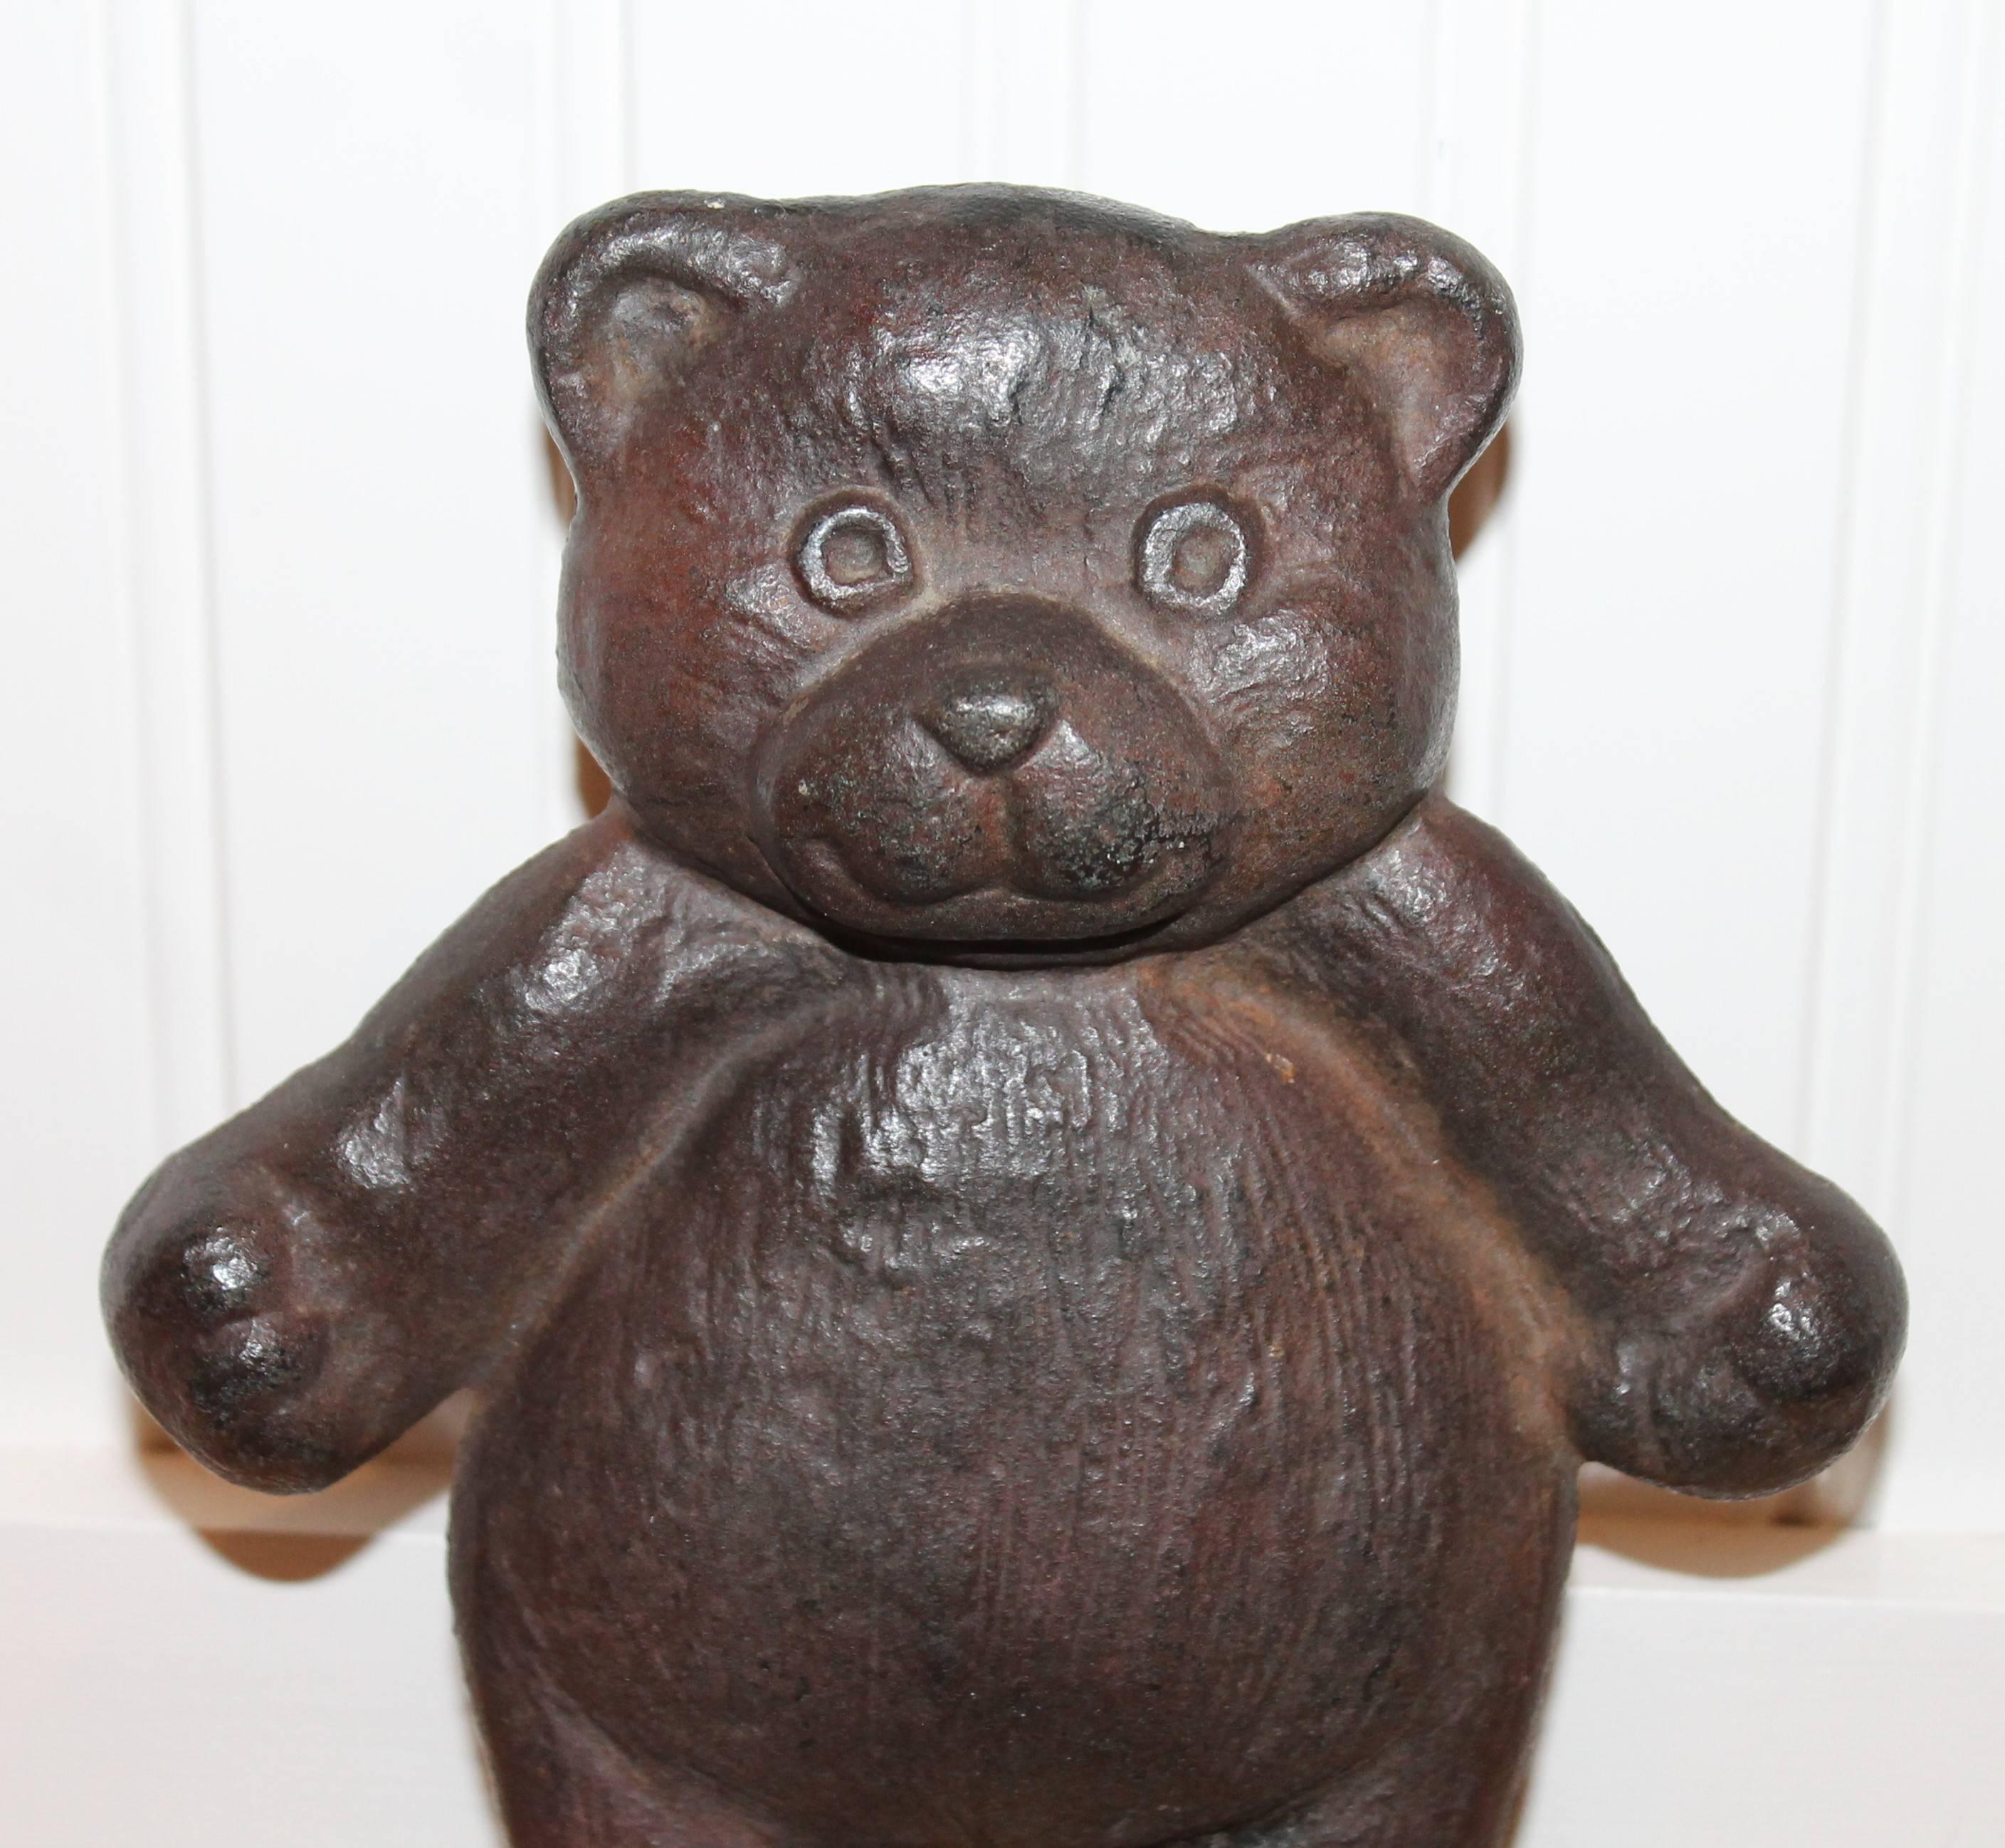 This very cool teddy bear doorstop is cast iron and is dated 1910 on the back side. The condition is very good with a nice patina.